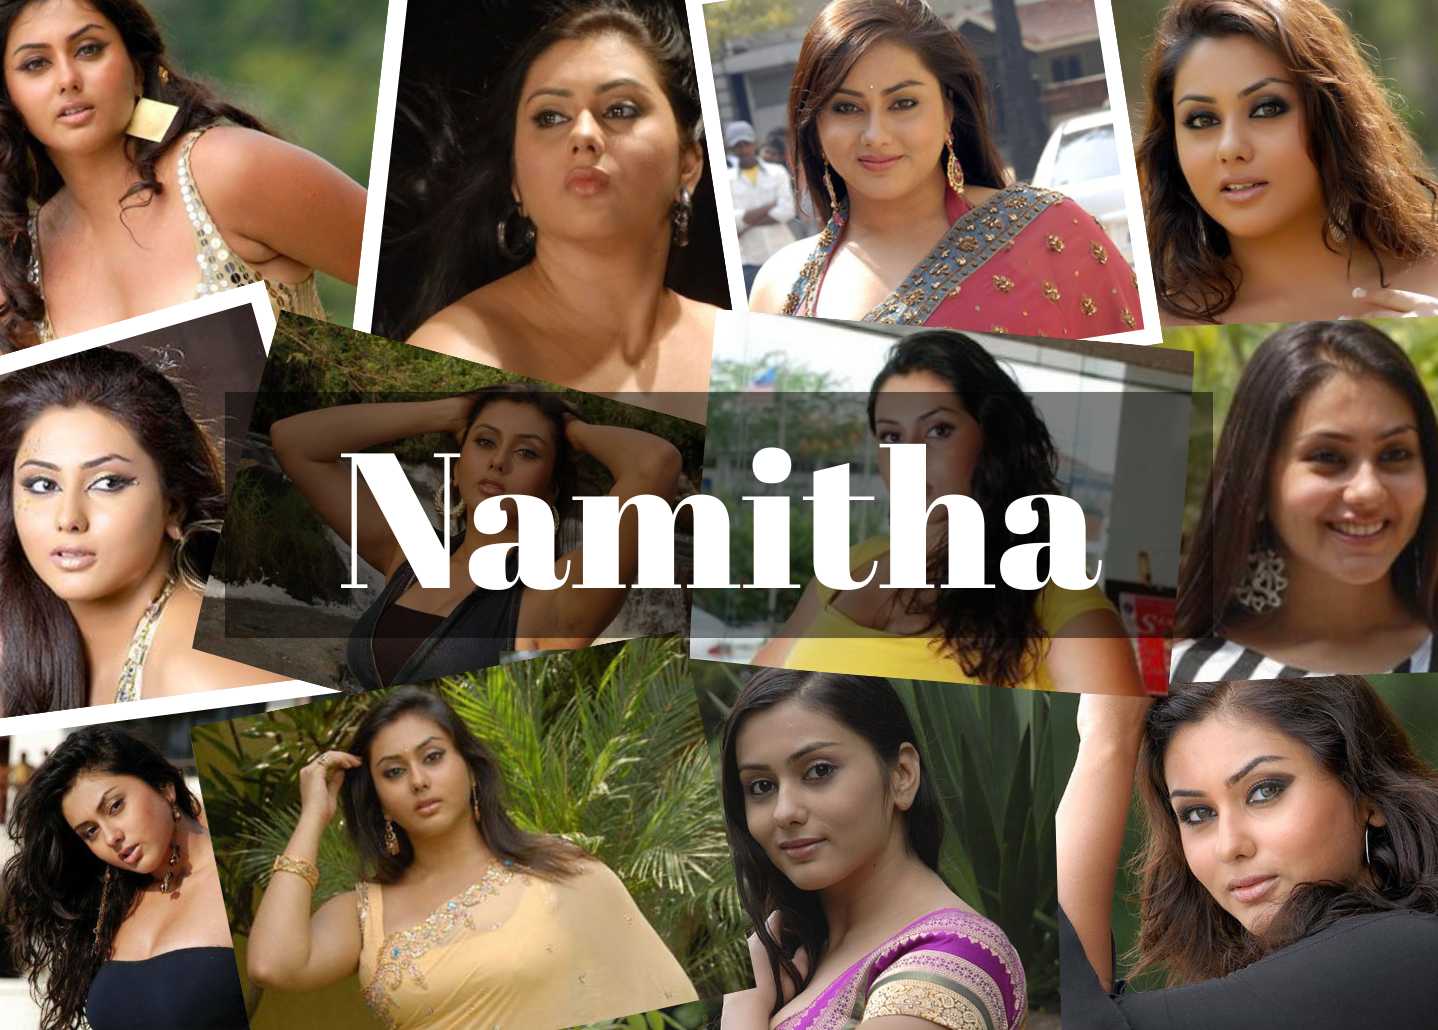 Nametha Bf Movie - Namitha Biography Net Worth Facts Controversy